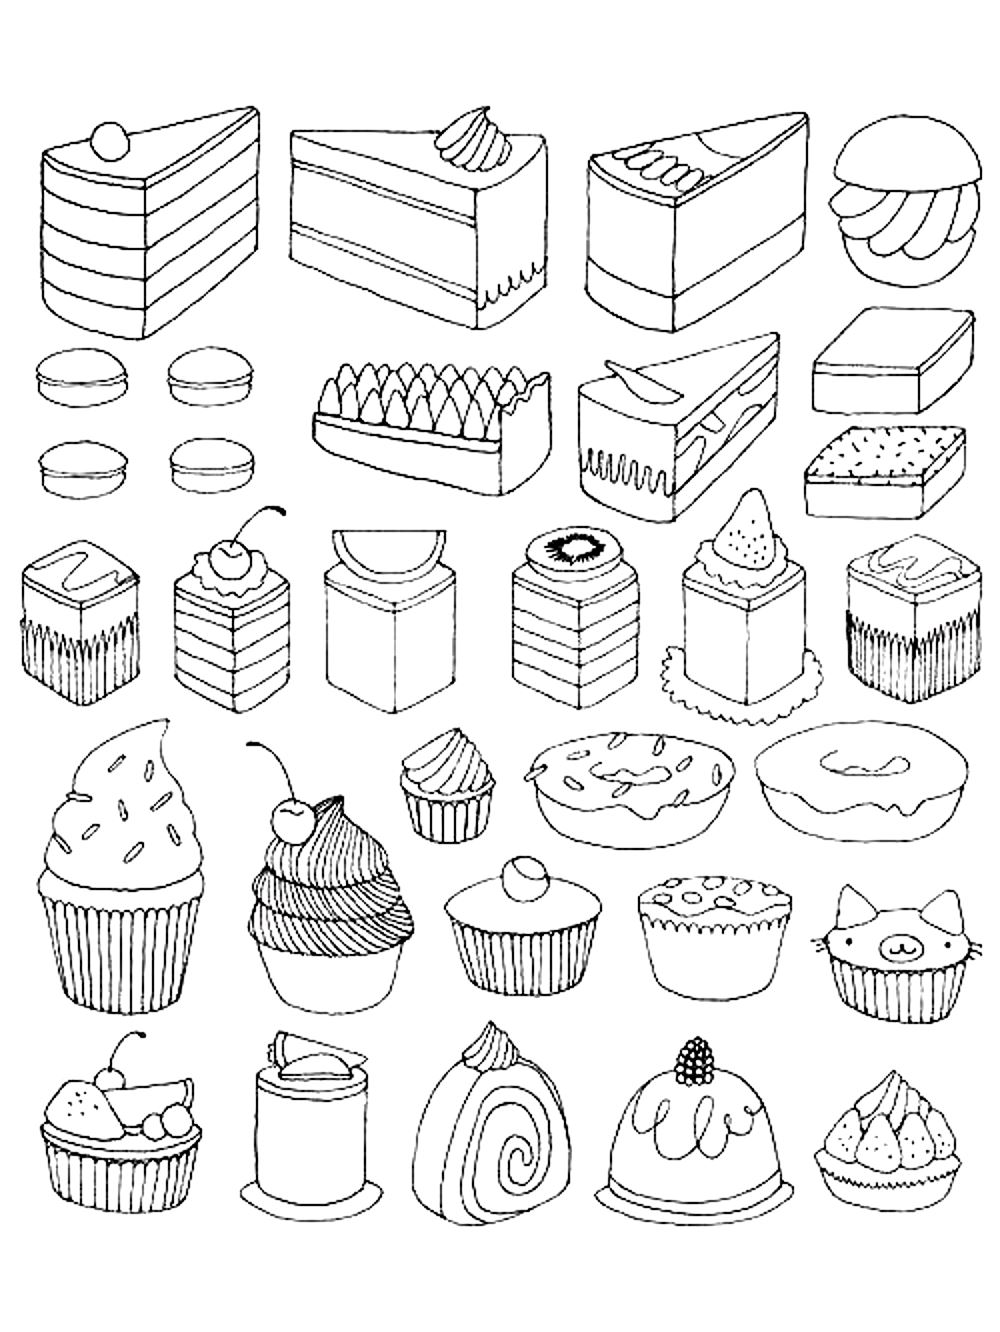 Coloring Adult Cupcakes And Little Cakes Coloring Page